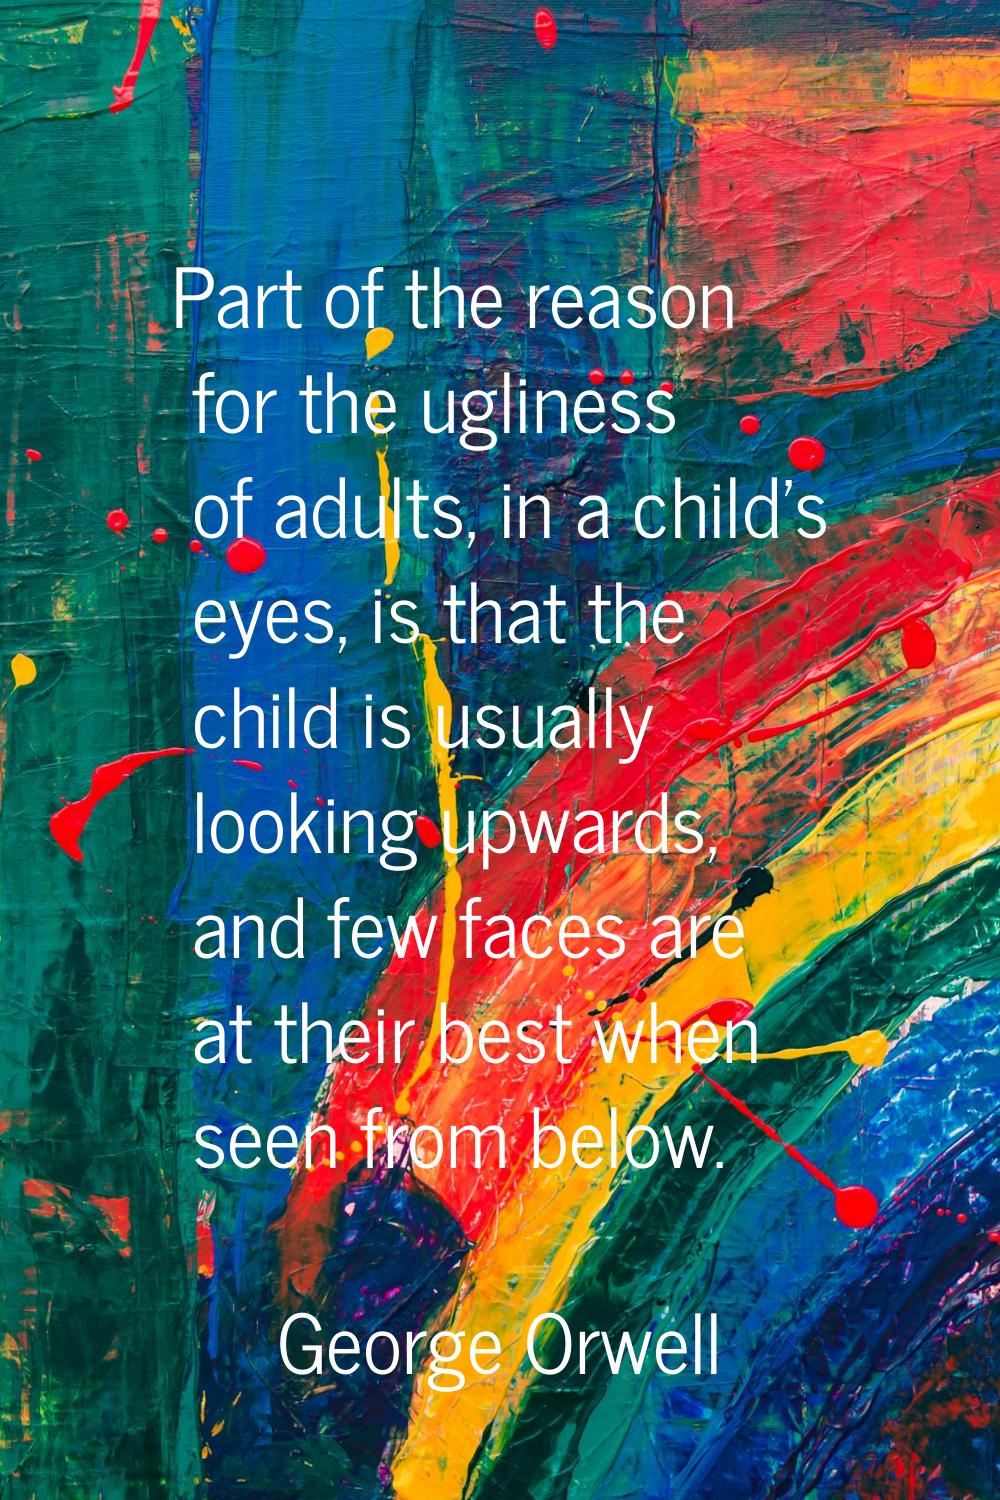 Part of the reason for the ugliness of adults, in a child's eyes, is that the child is usually look